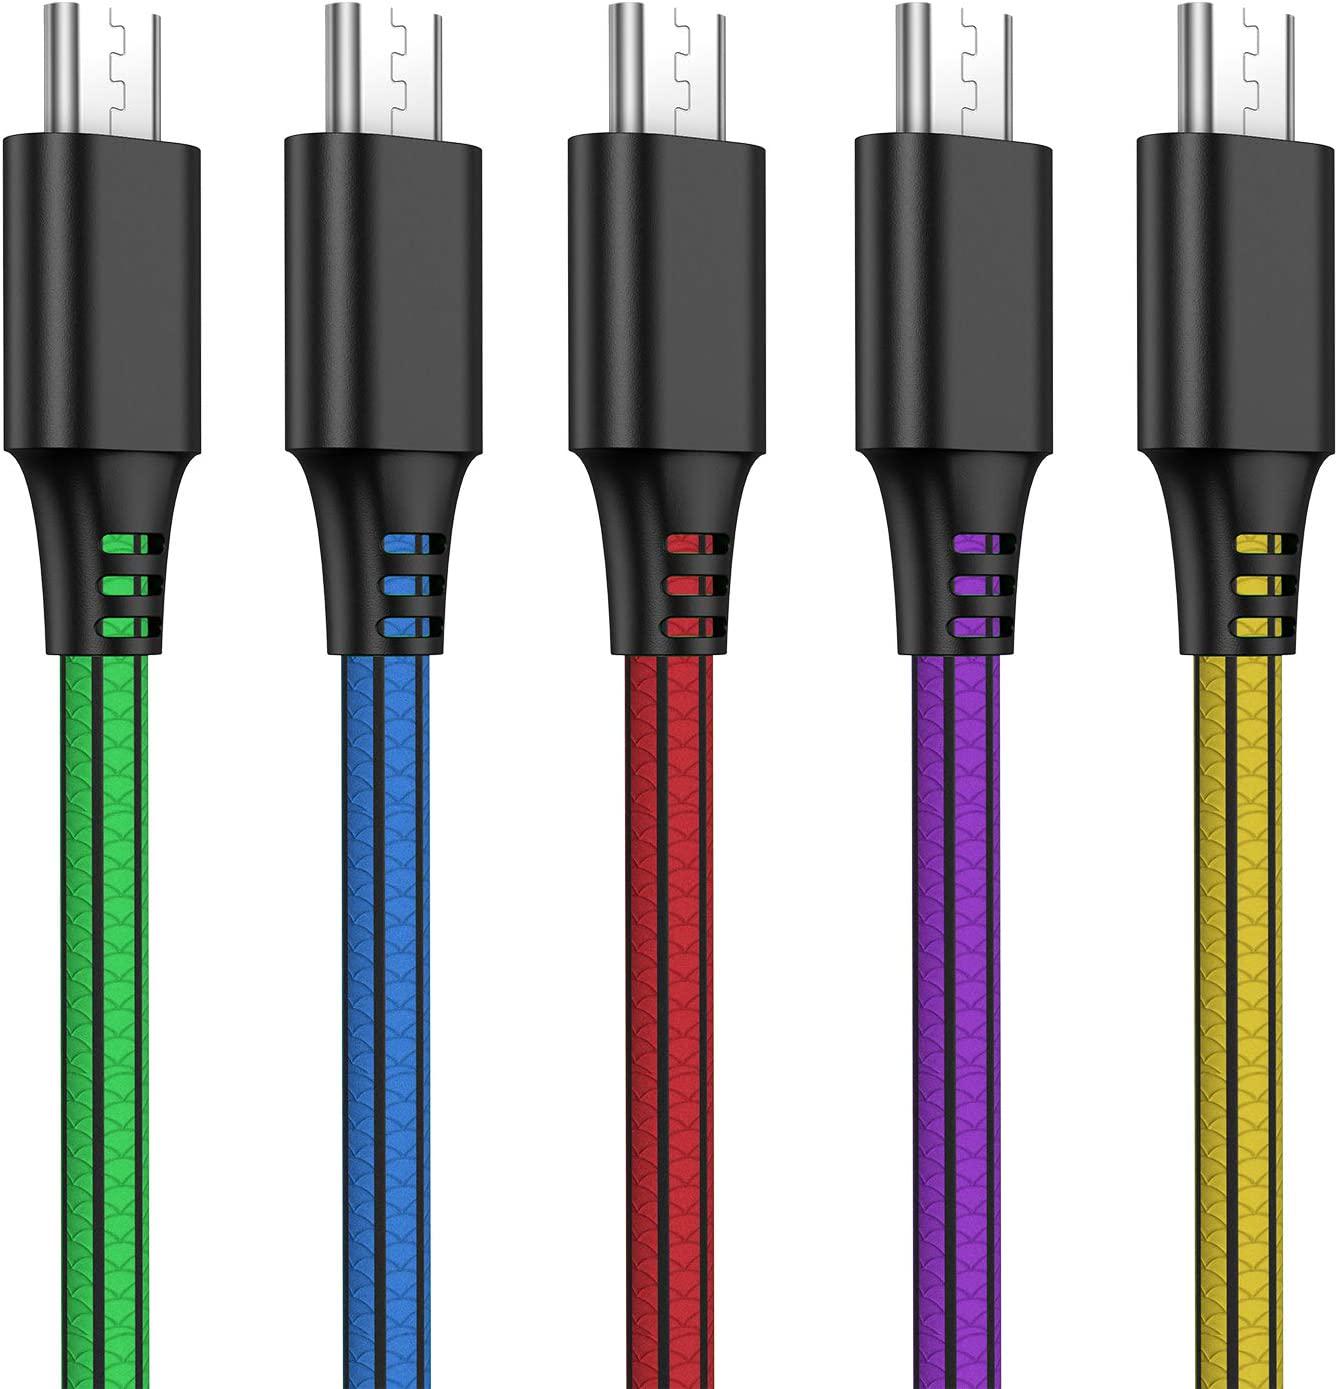 SCHITEC, Micro USB Cable, 5 Pack (6.6ft/2m) 2.4A High Speed Android Charging Cable PVC Micro USB Charger for Samsung Galaxy S6 S7 S4 S3 S2 J1 Note 2, HTC, Kindle, Moto G5,